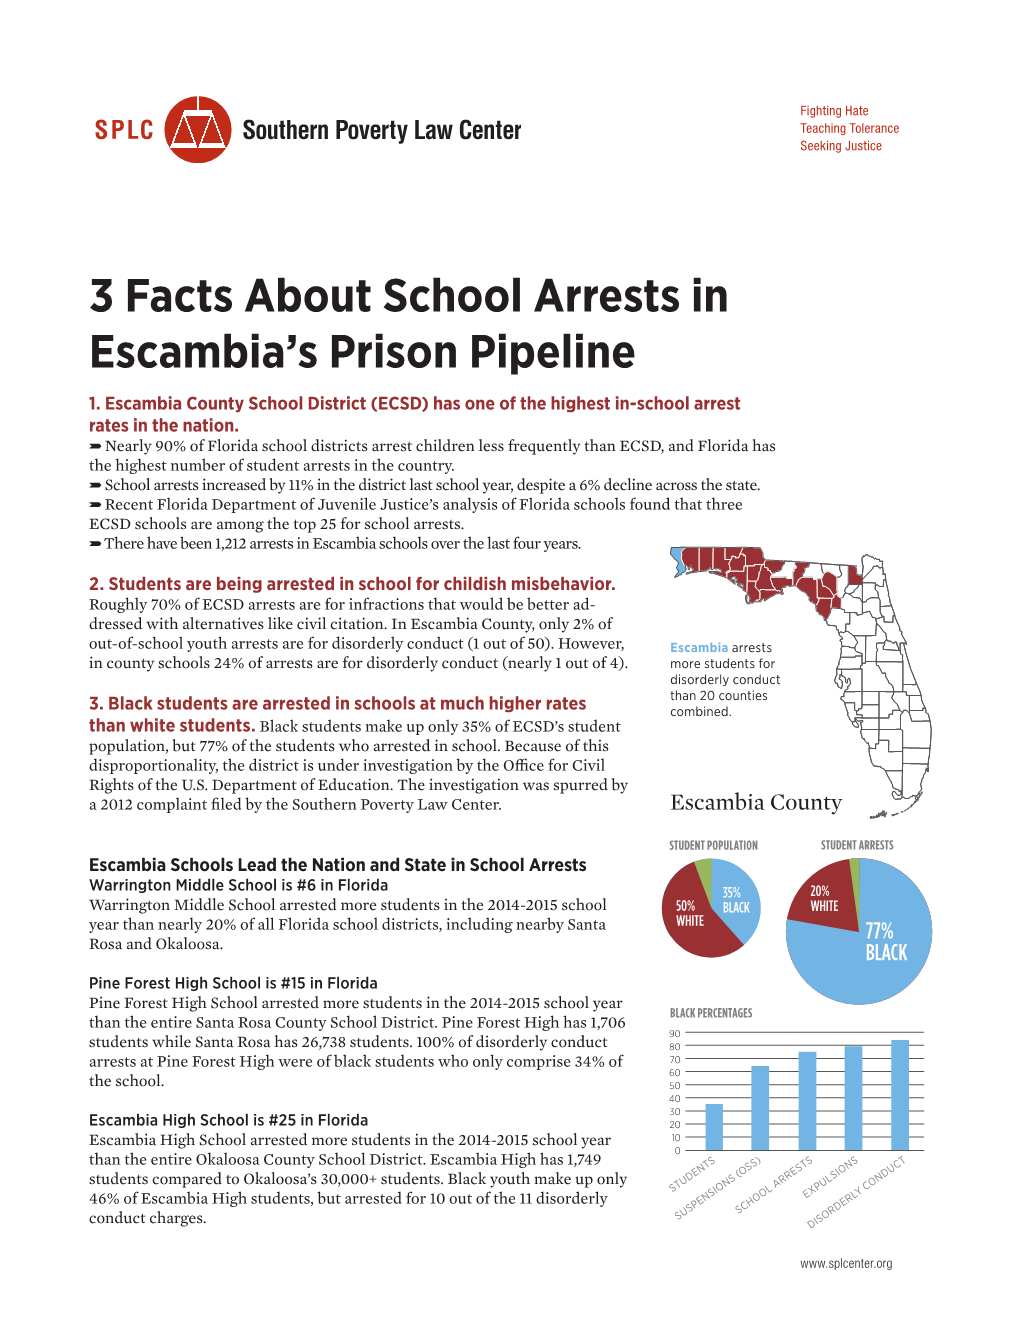 3 Facts About School Arrests in Escambia's Prison Pipeline